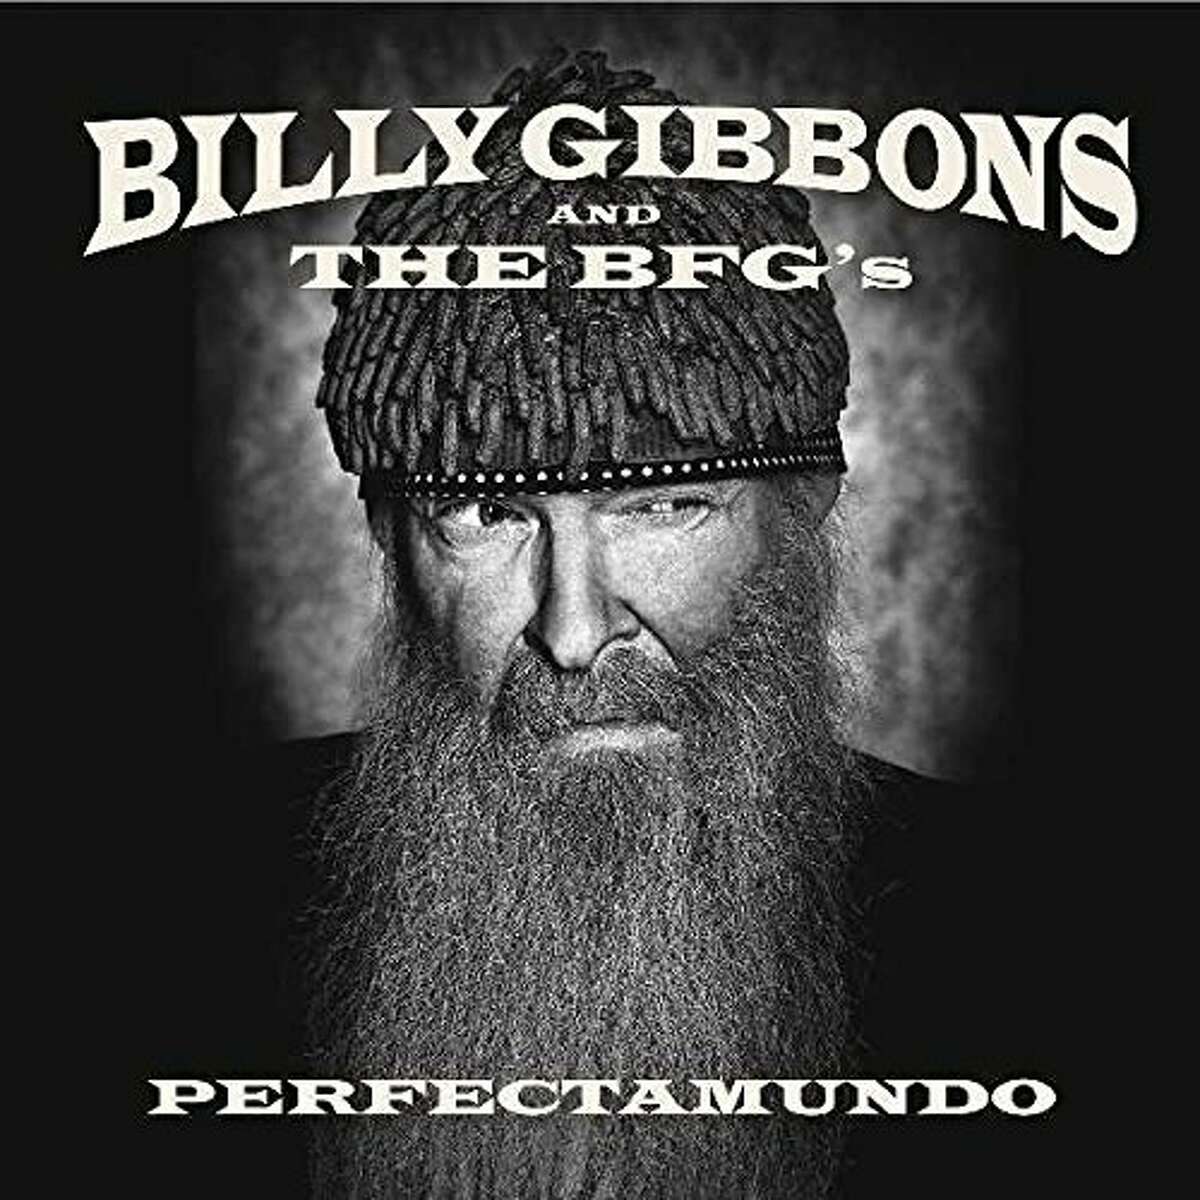 "Perfectamundo" is a new album by Billy Gibbons and The BFG's